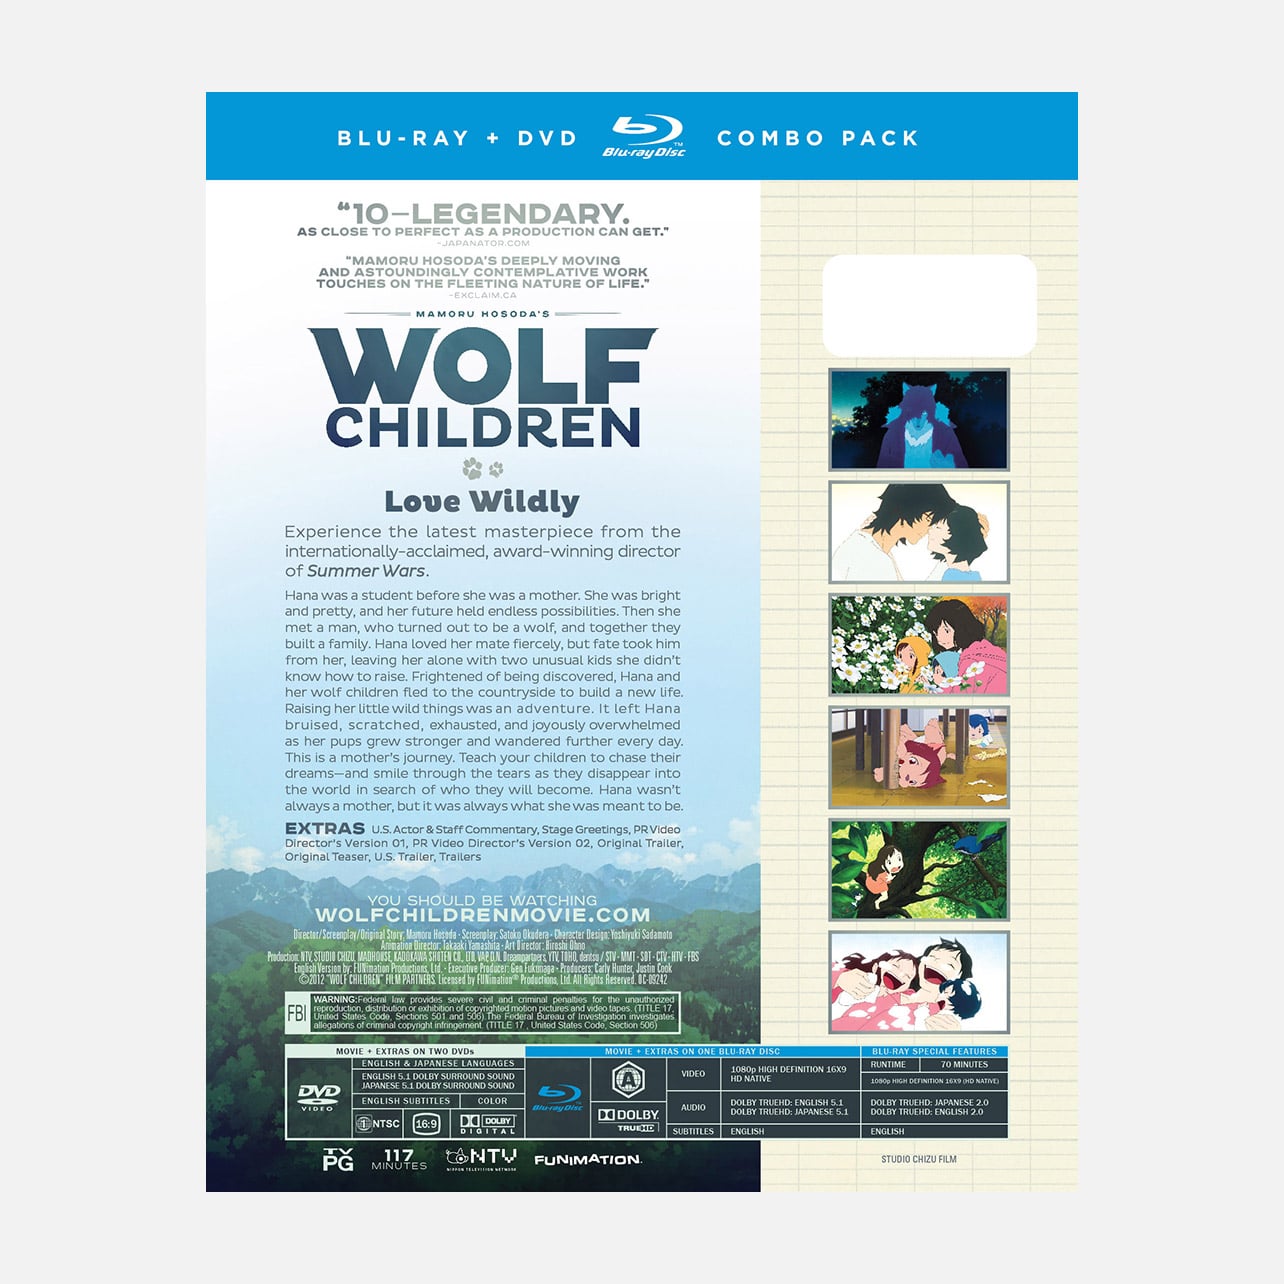 Wolf Children - The Movie - Blu-ray + DVD image count 1